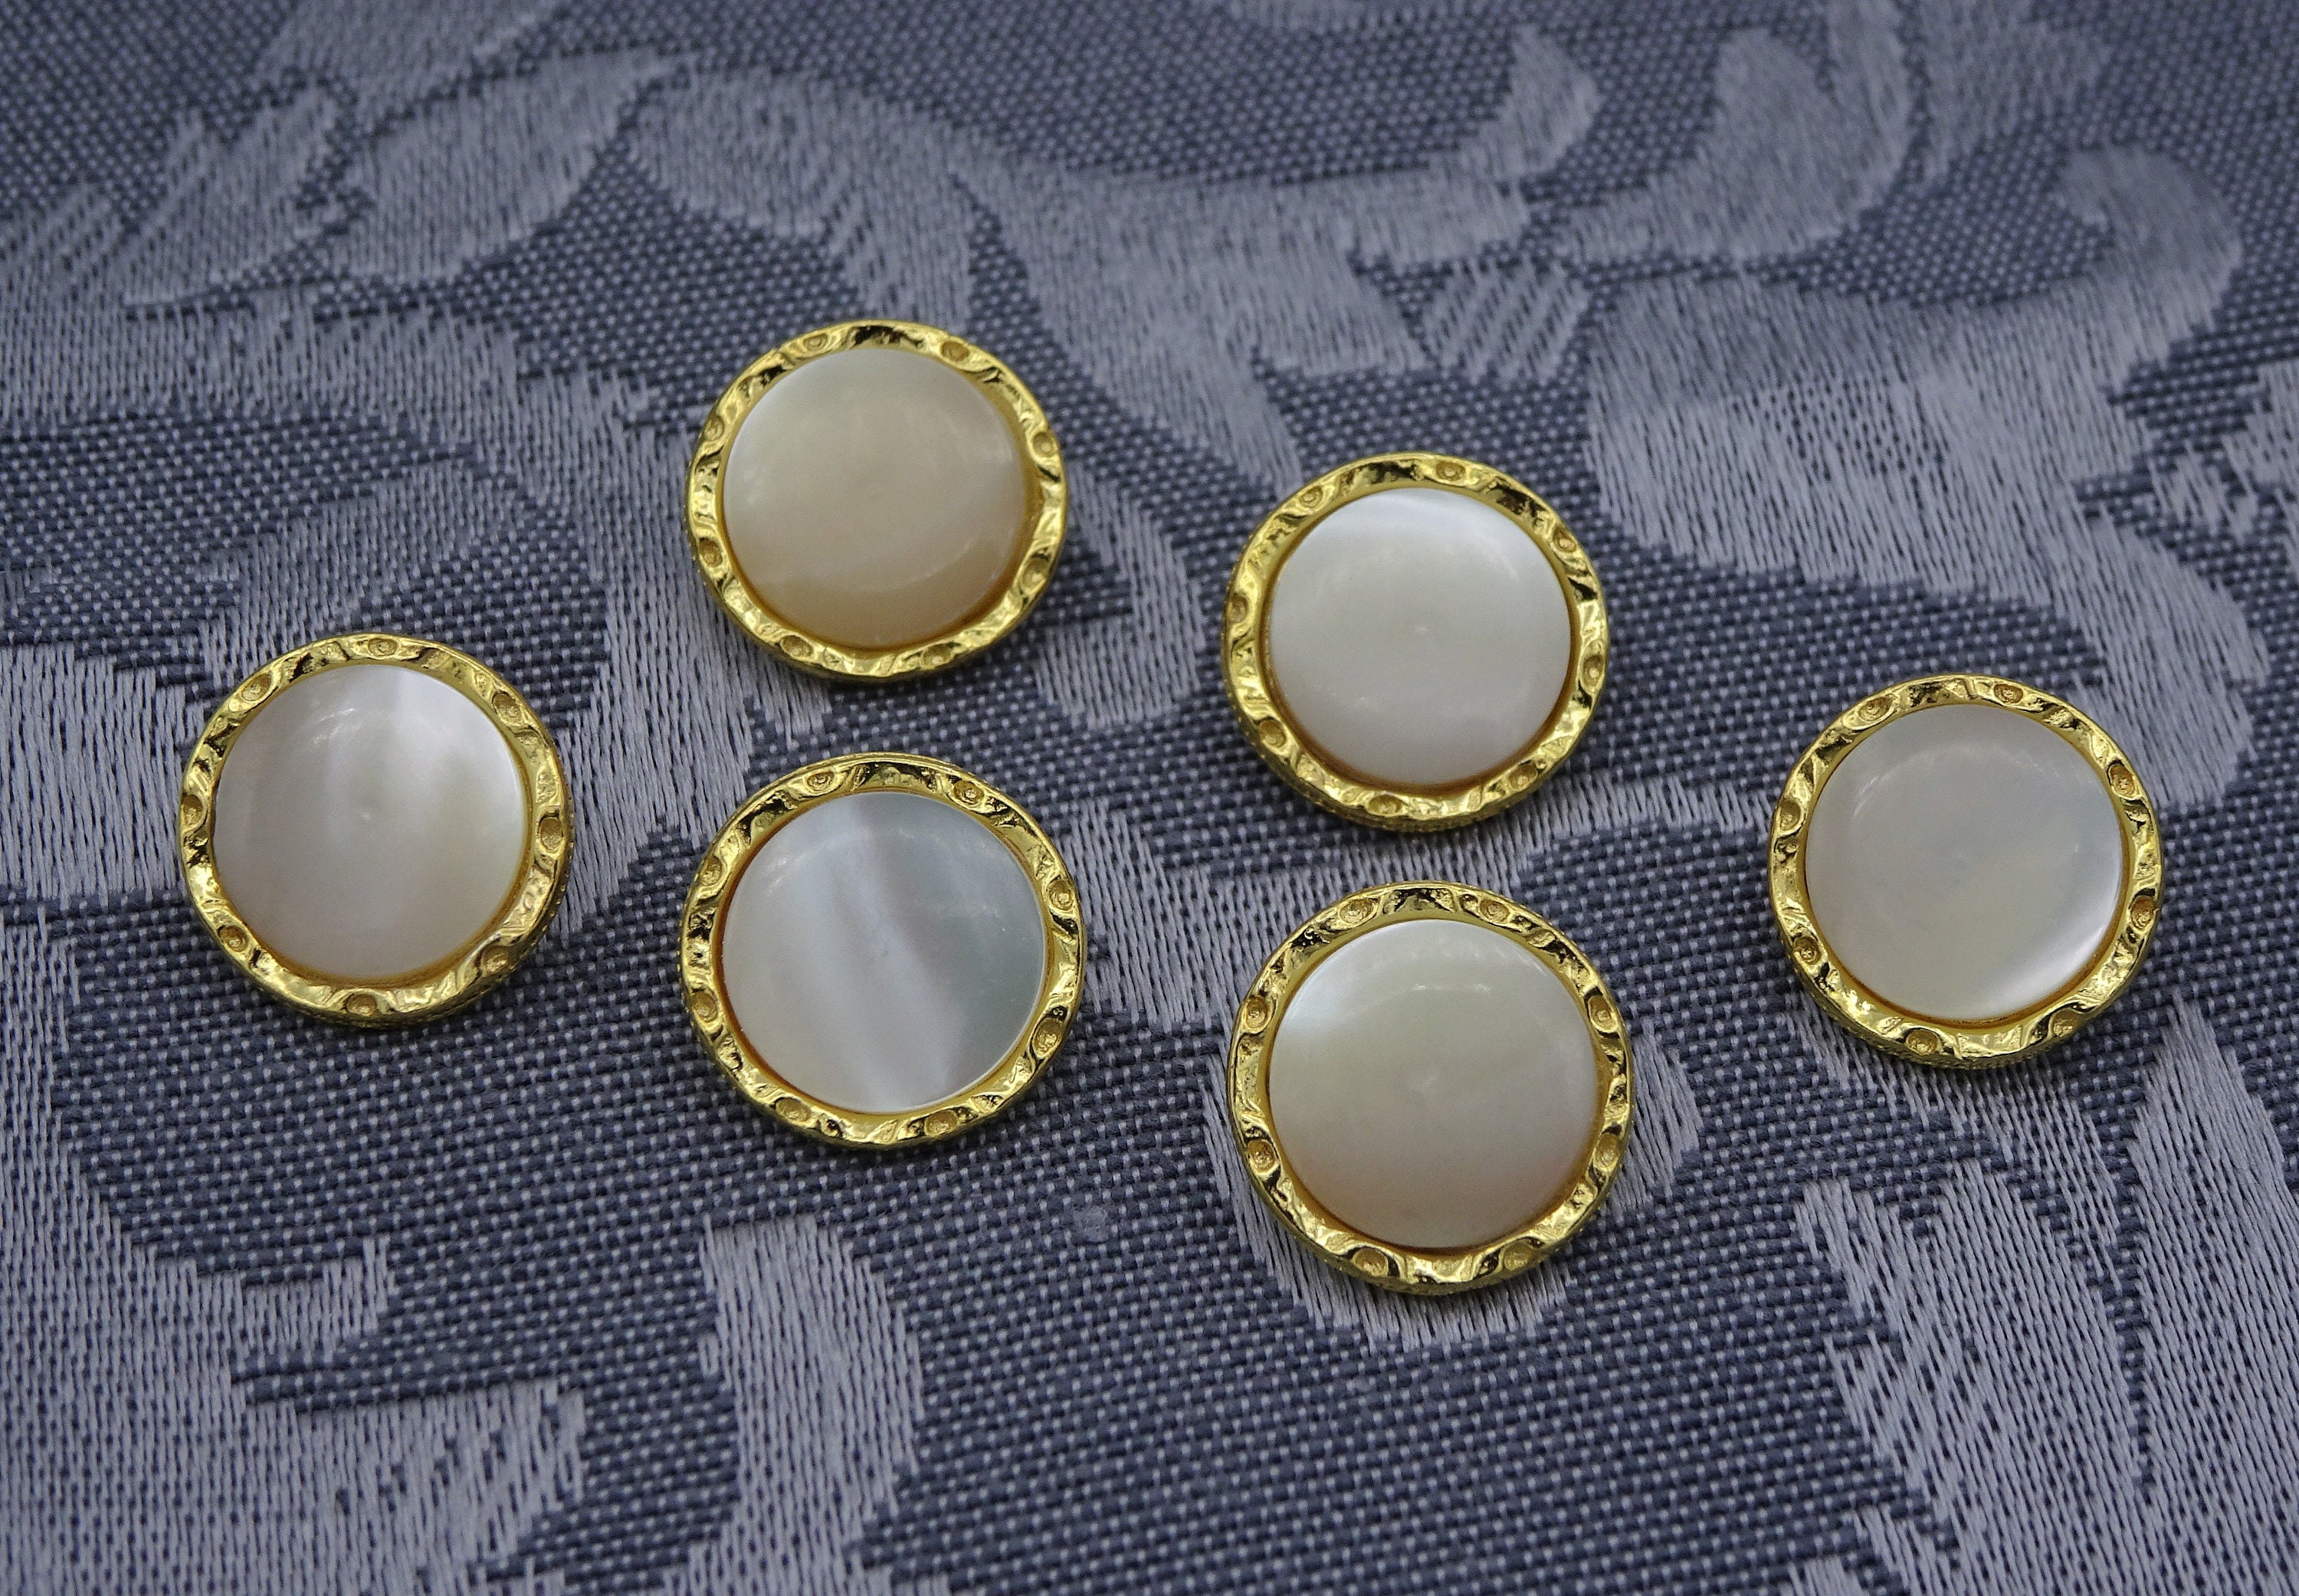 10, White and Gold Fancy Shank Buttons, Gold Metallic Heart Border Buttons,  White Fancy Style Buttons, White and Gold Shank Button 